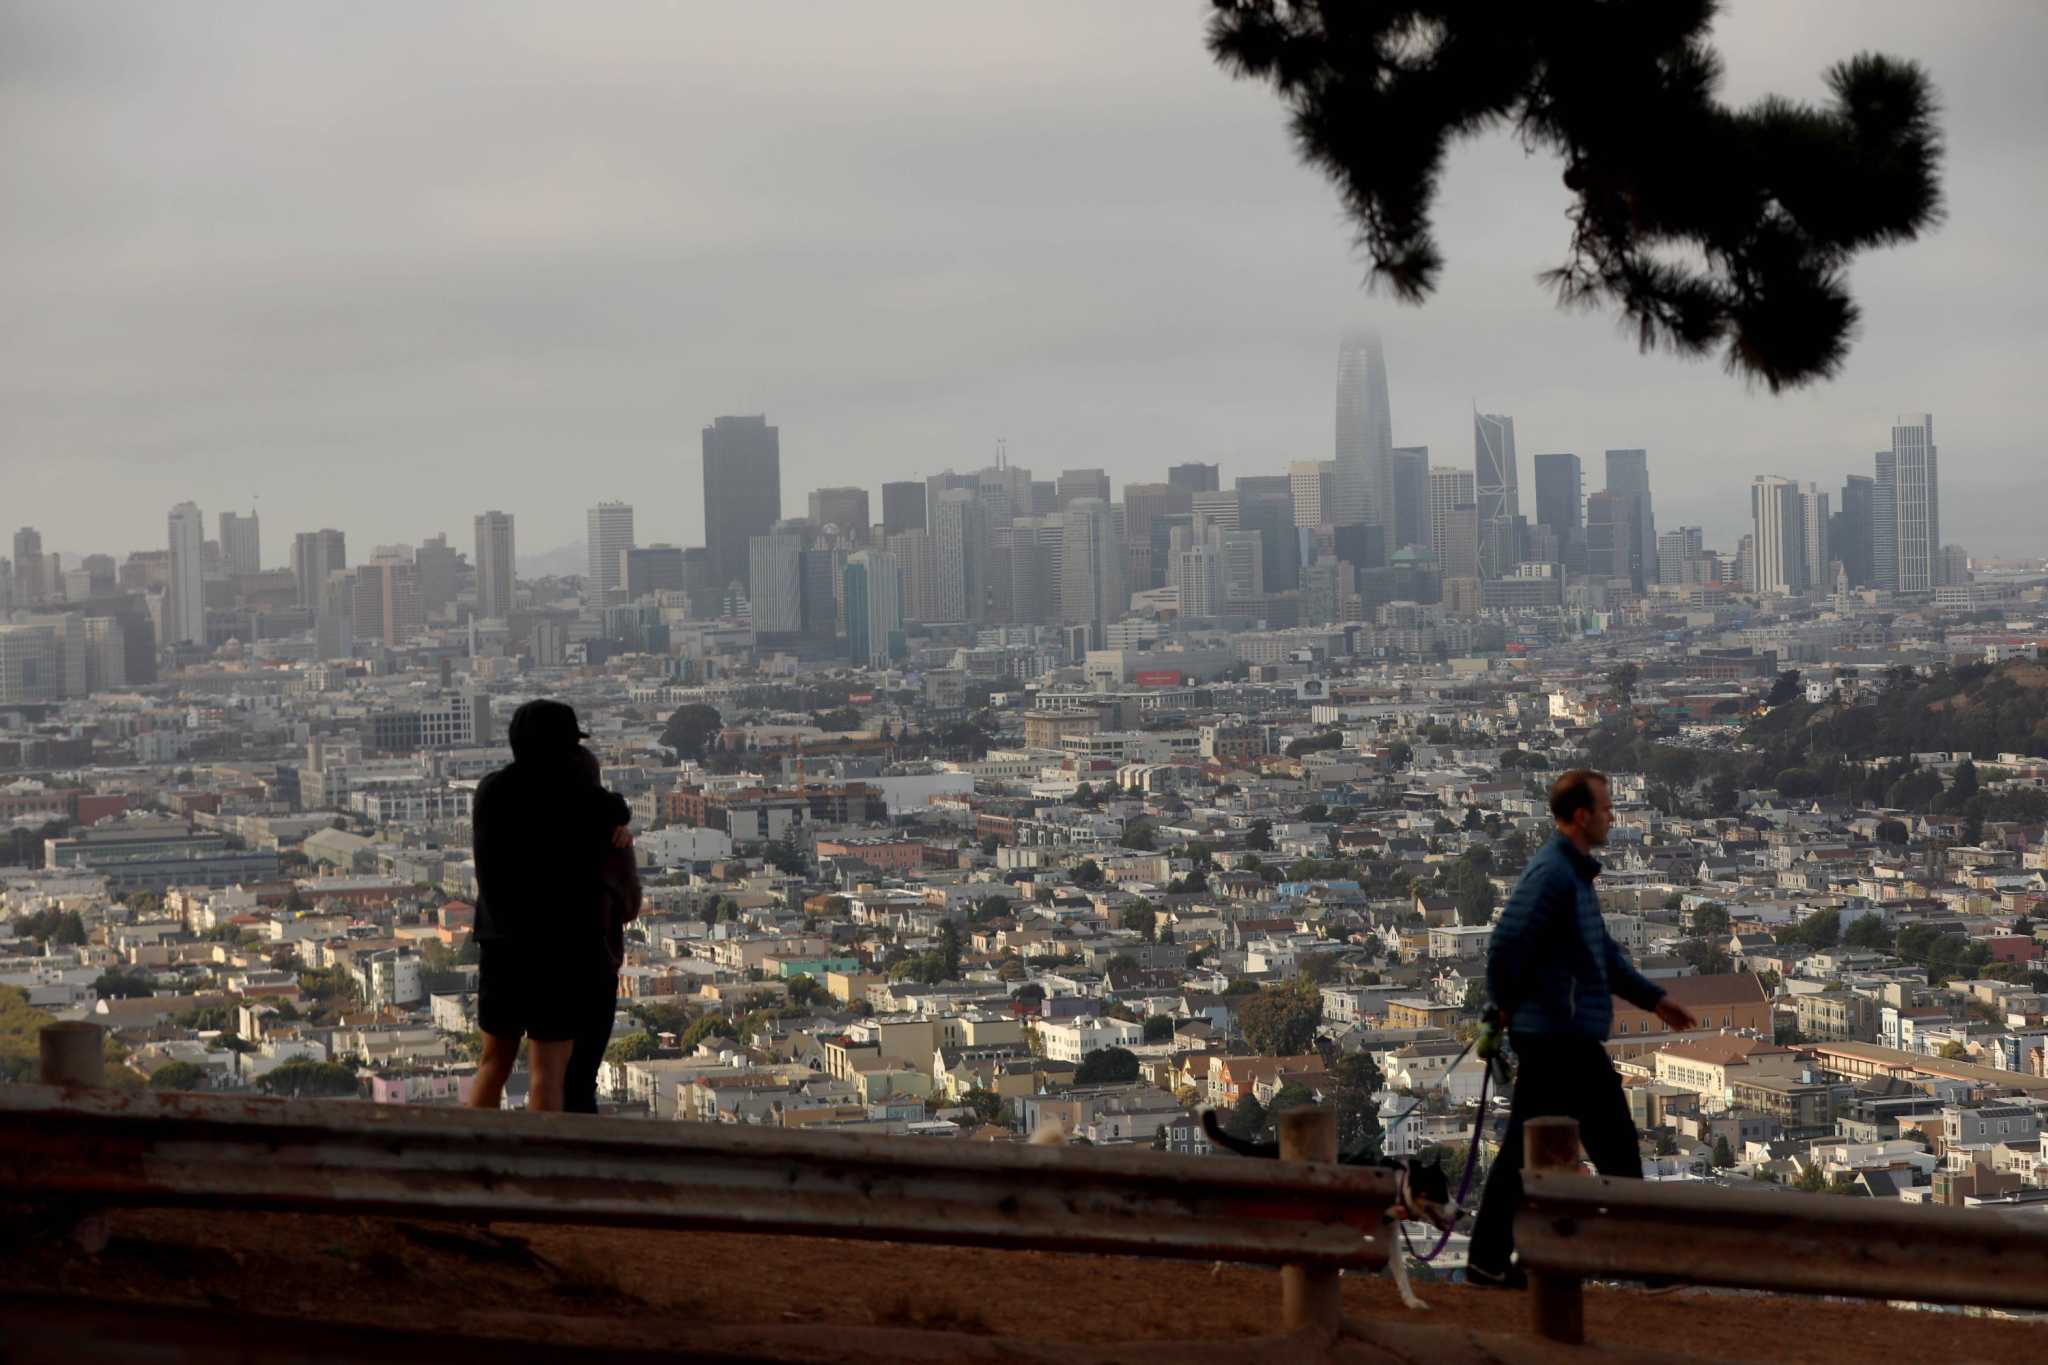 San Francisco may be small but it s among America s most densely